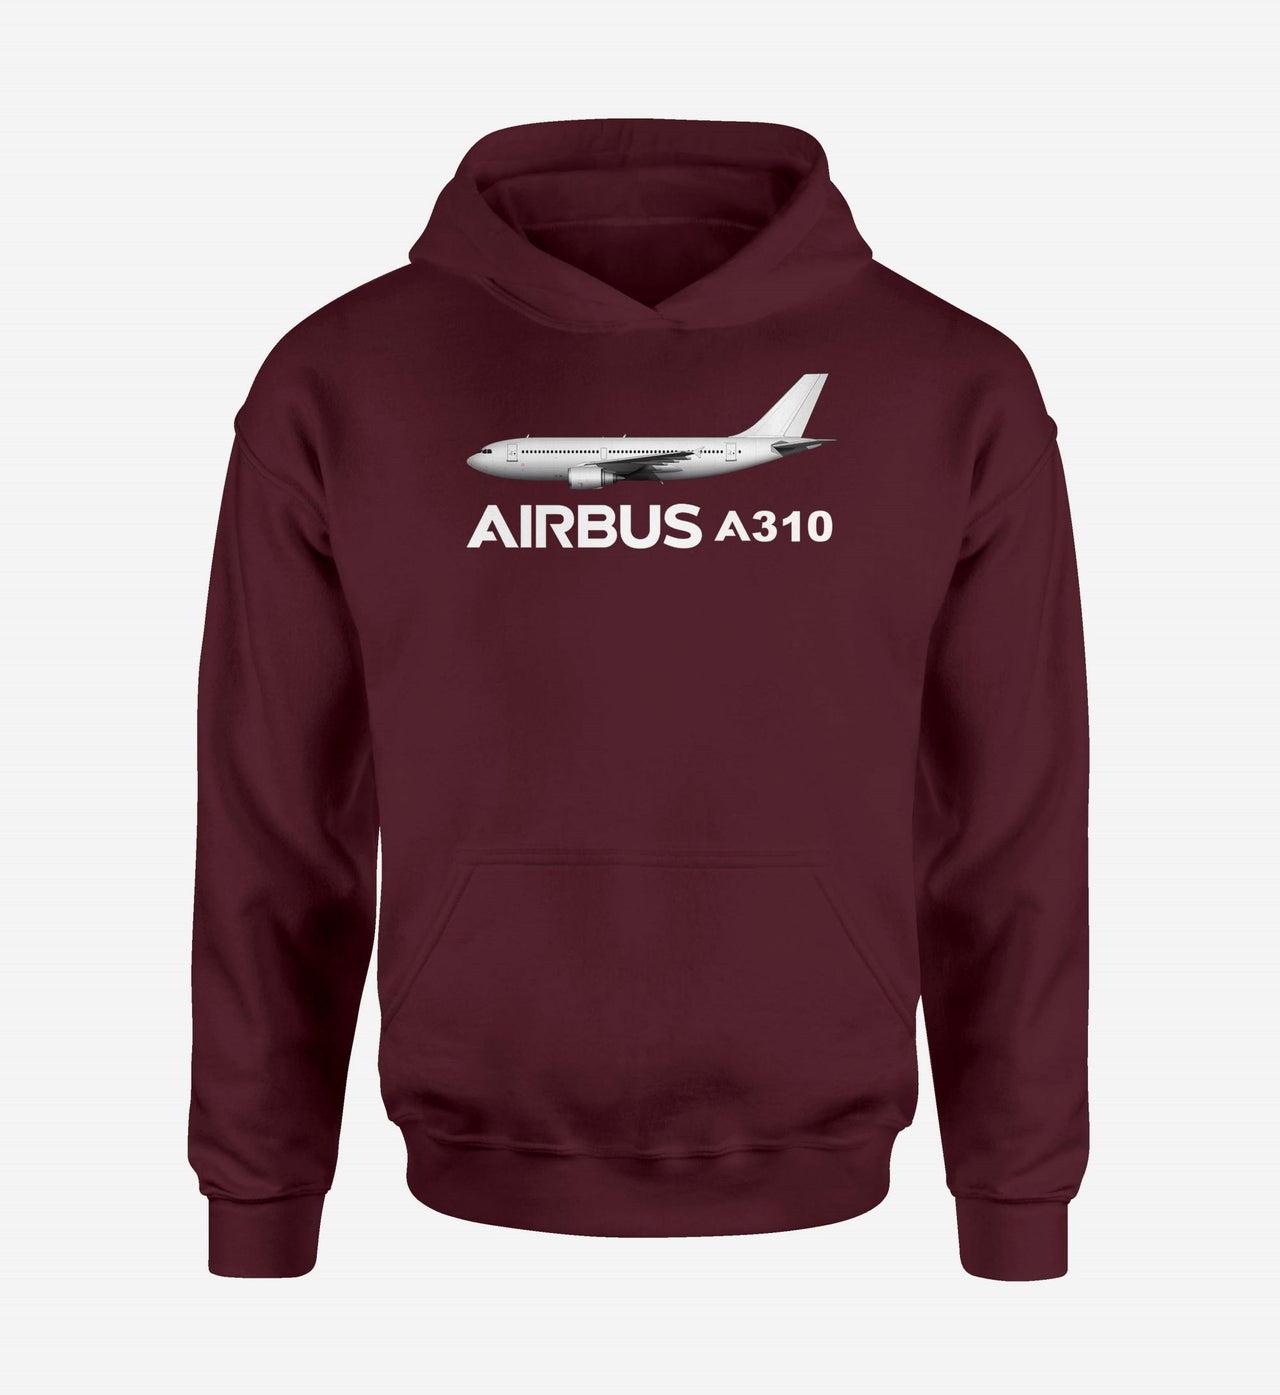 The Airbus A310 Designed Hoodies